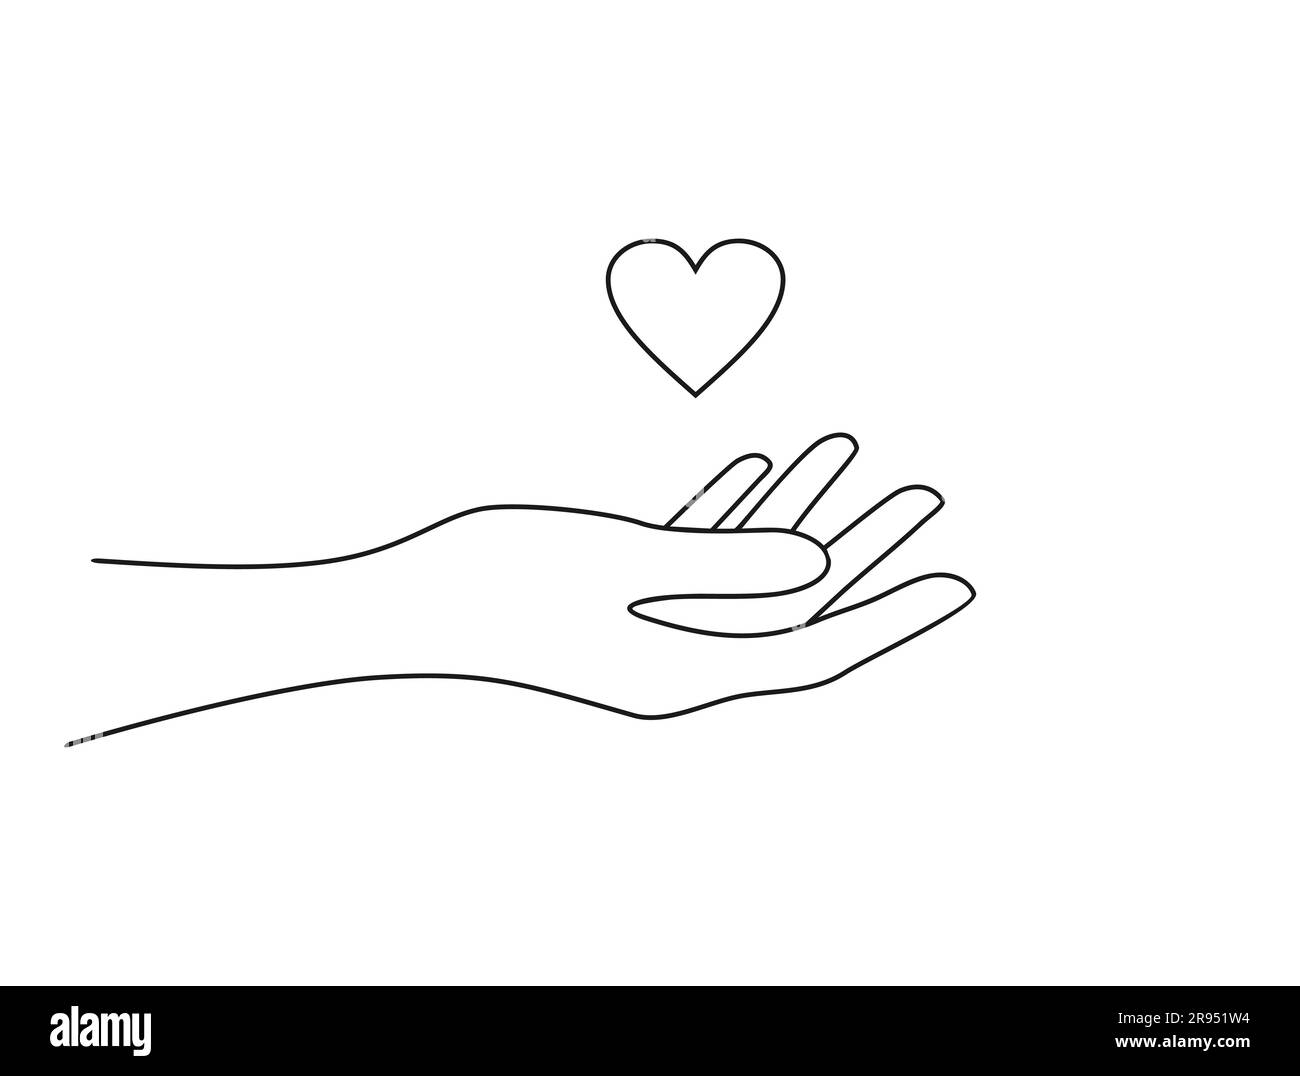 A hand holding a heart. Minimalistic black and white vector ...